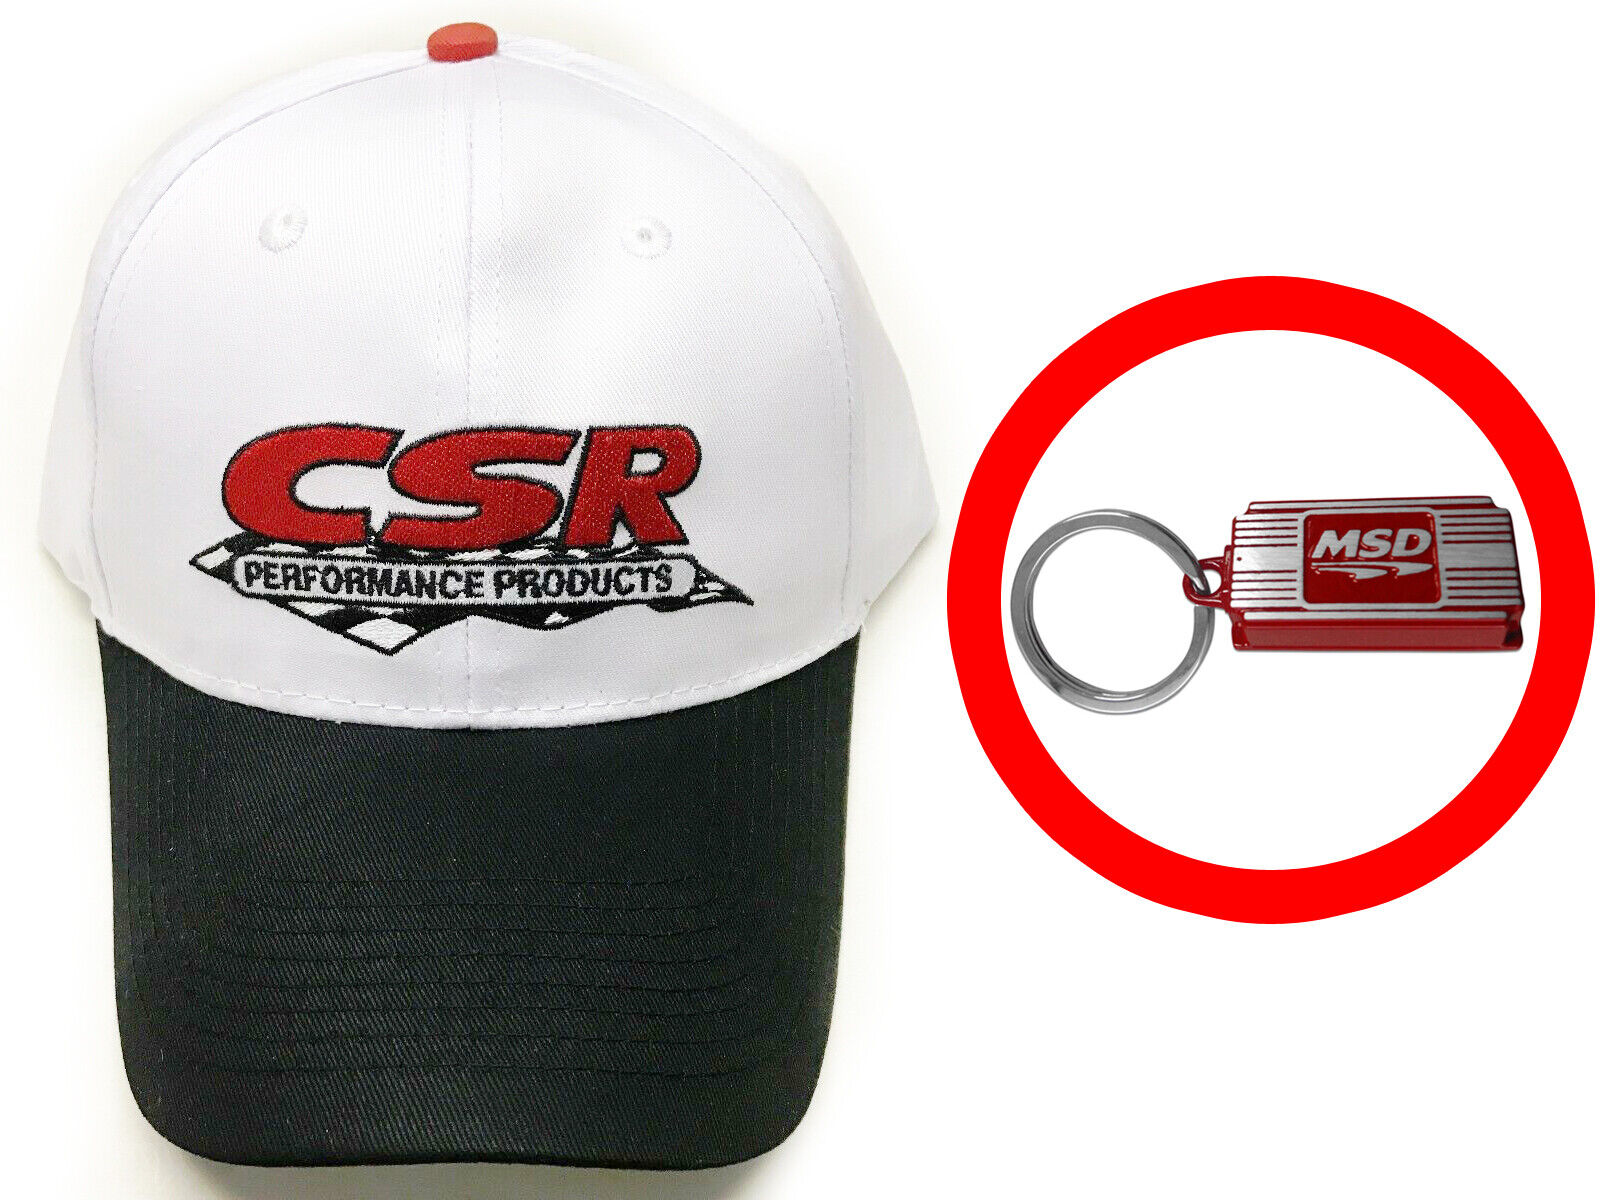 MSD KEY CHAIN 9390 CSR PERFORMANCE PRODUCTS HAT NEW